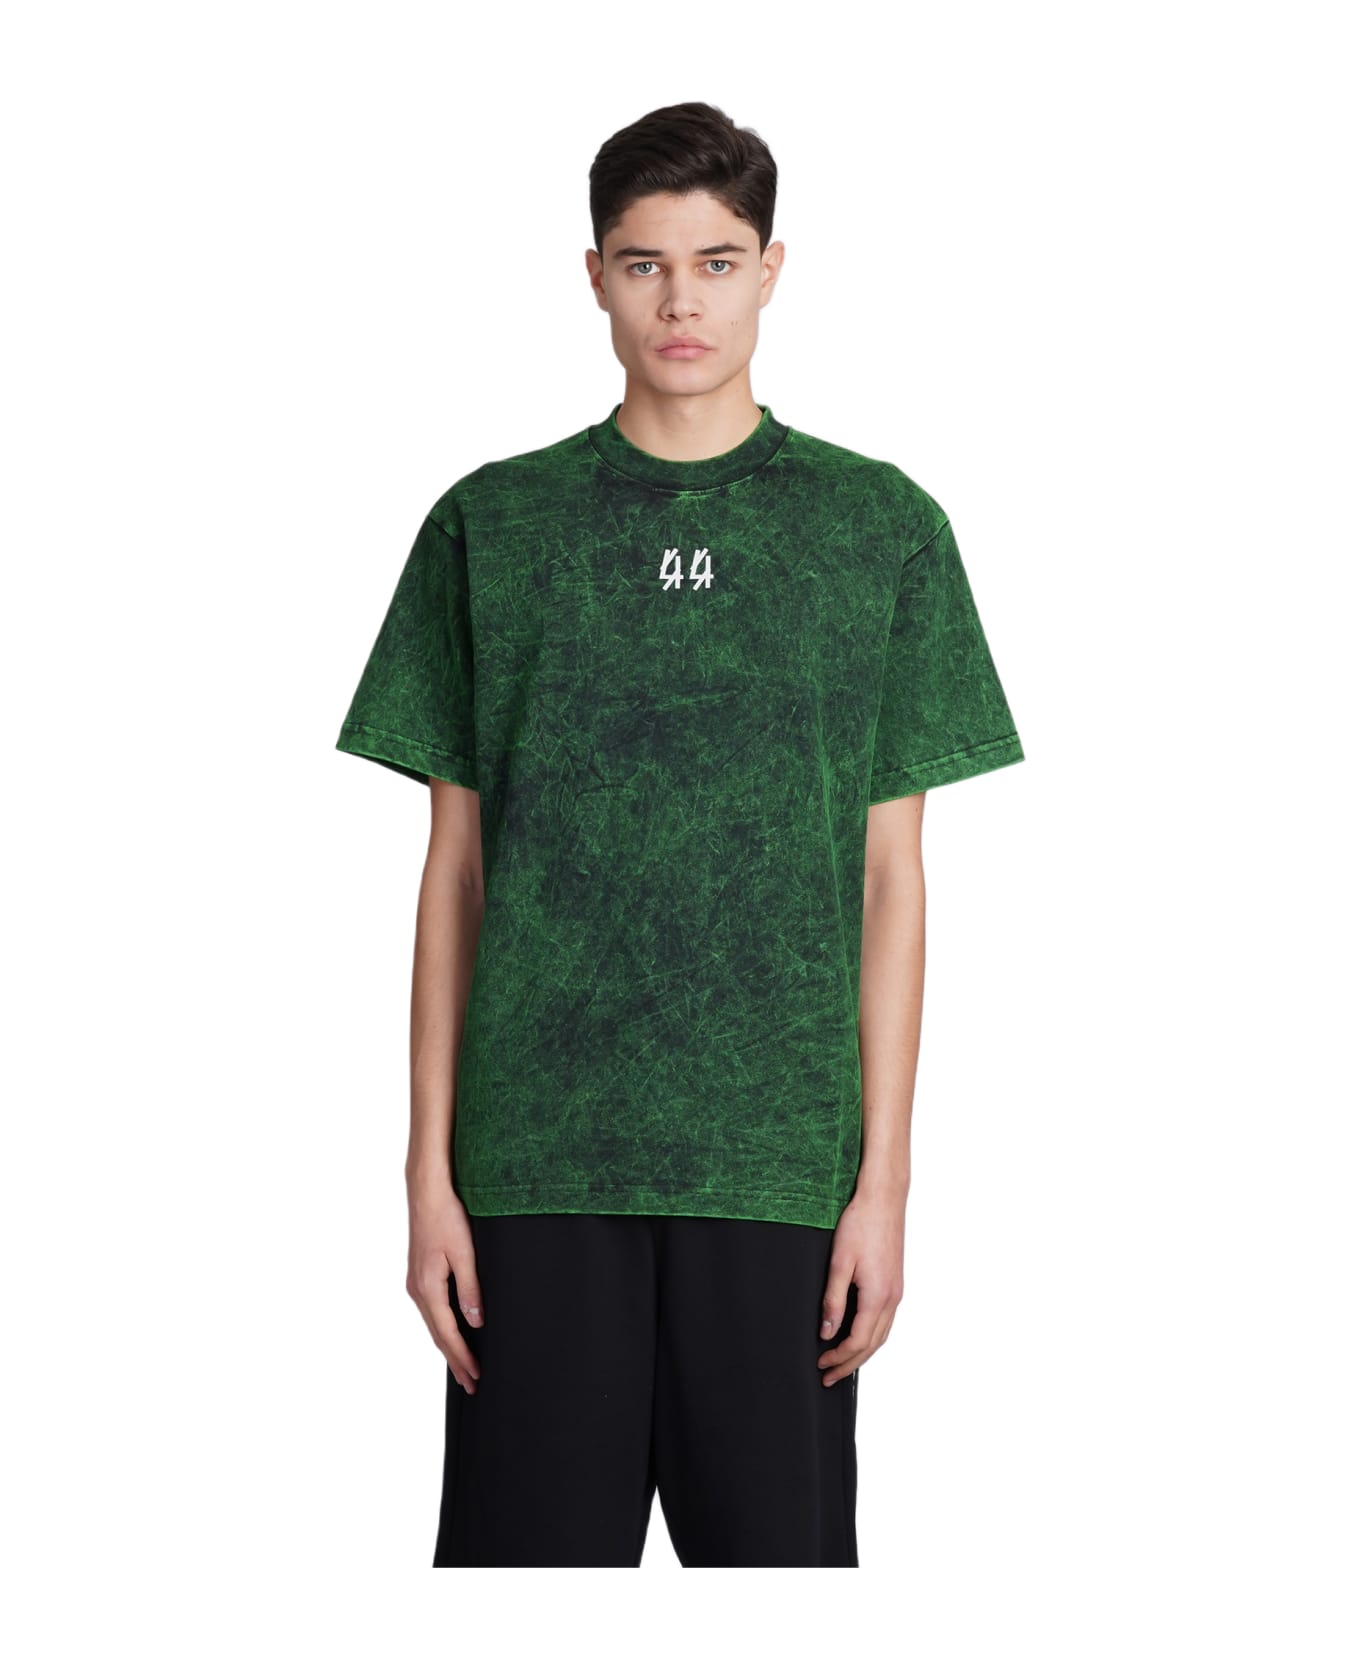 44 Label Group T-shirt In Green Cotton - Blk+sol.green + 44 solid シャツ